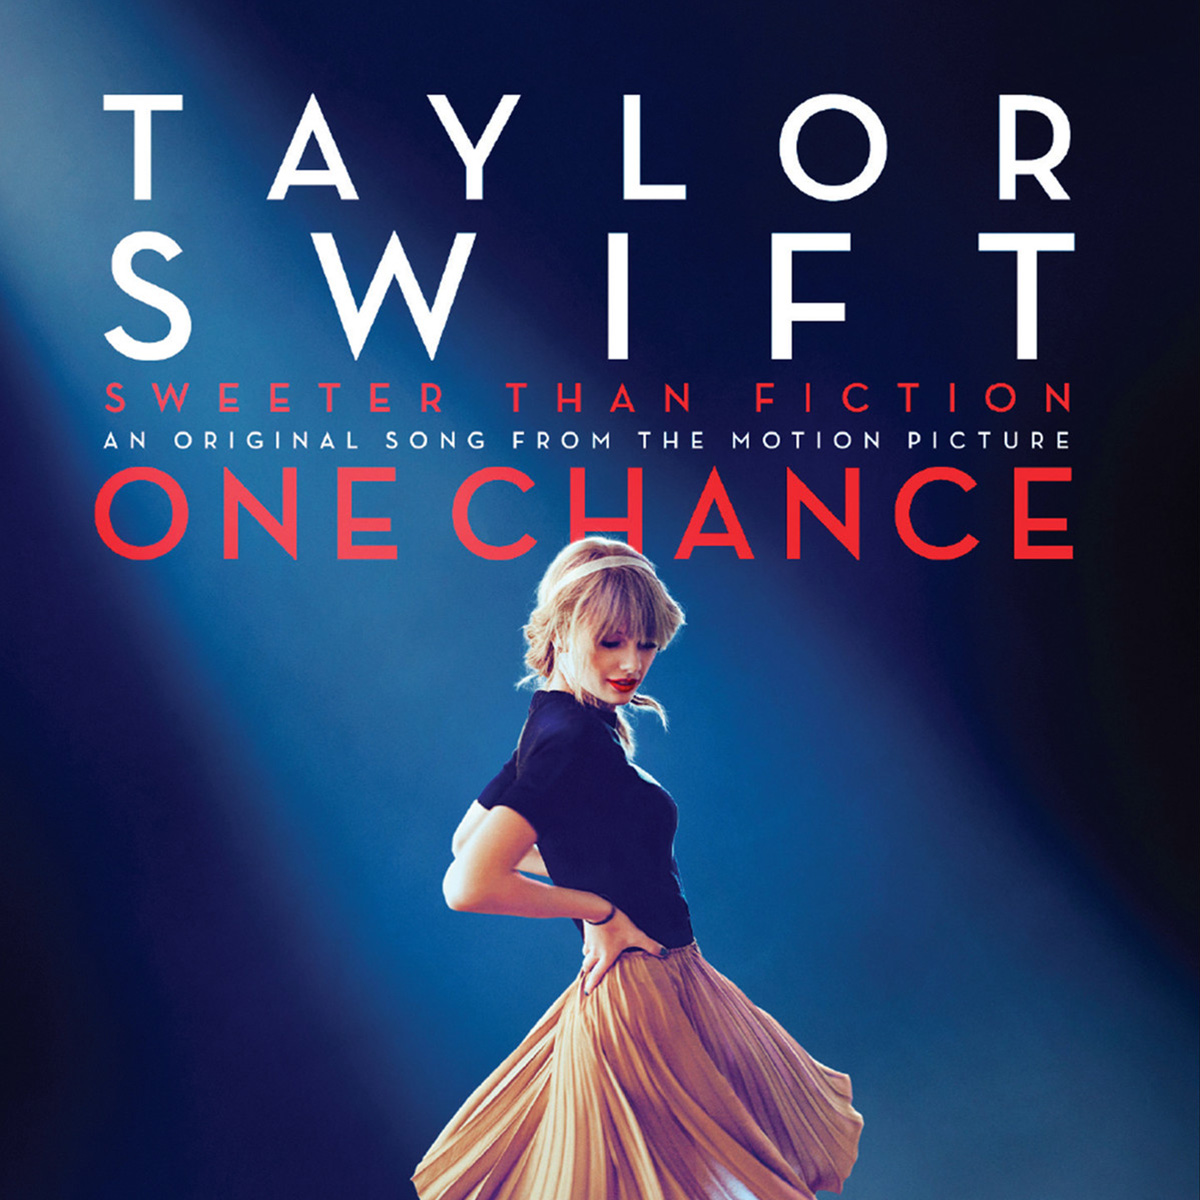 Taylor Swift – Sweeter Than Fiction